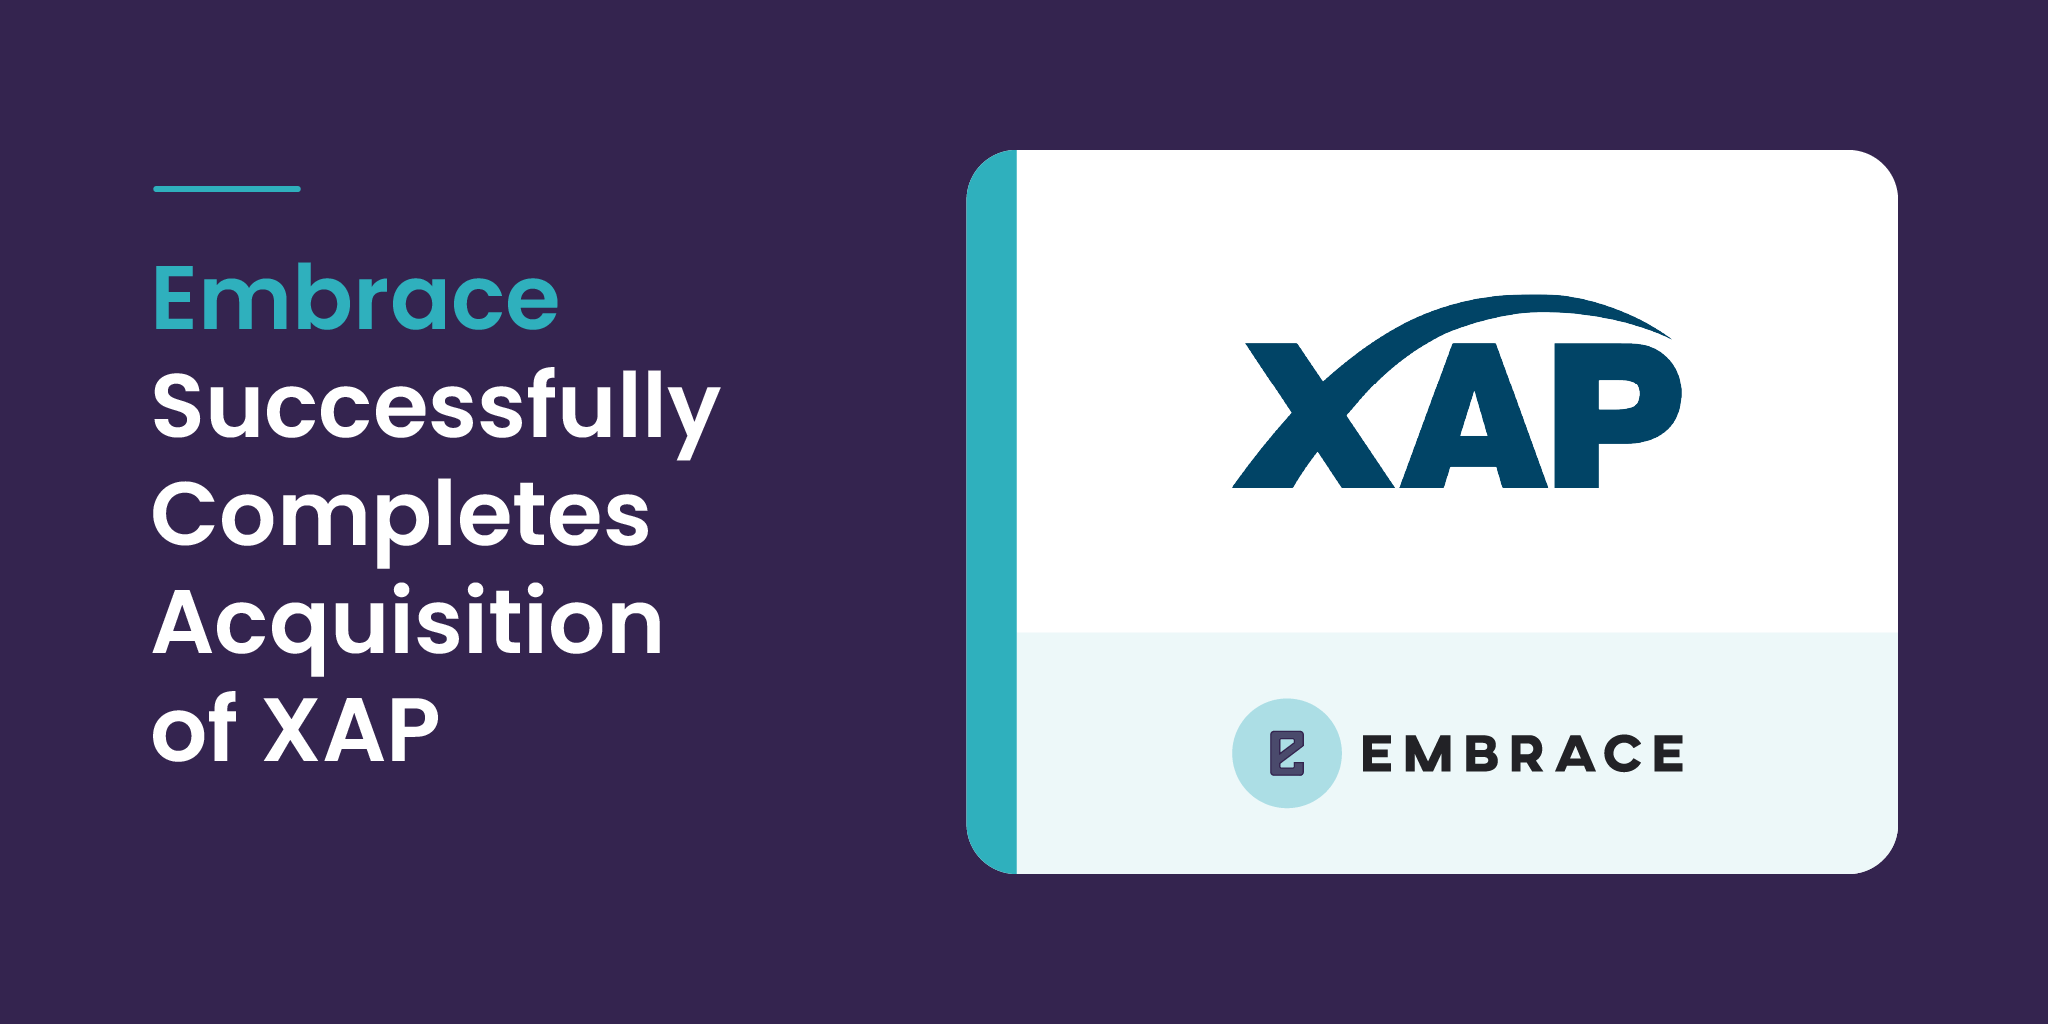 Embrace acquires XAP Corporation, Pioneering New Heights in Education Technology